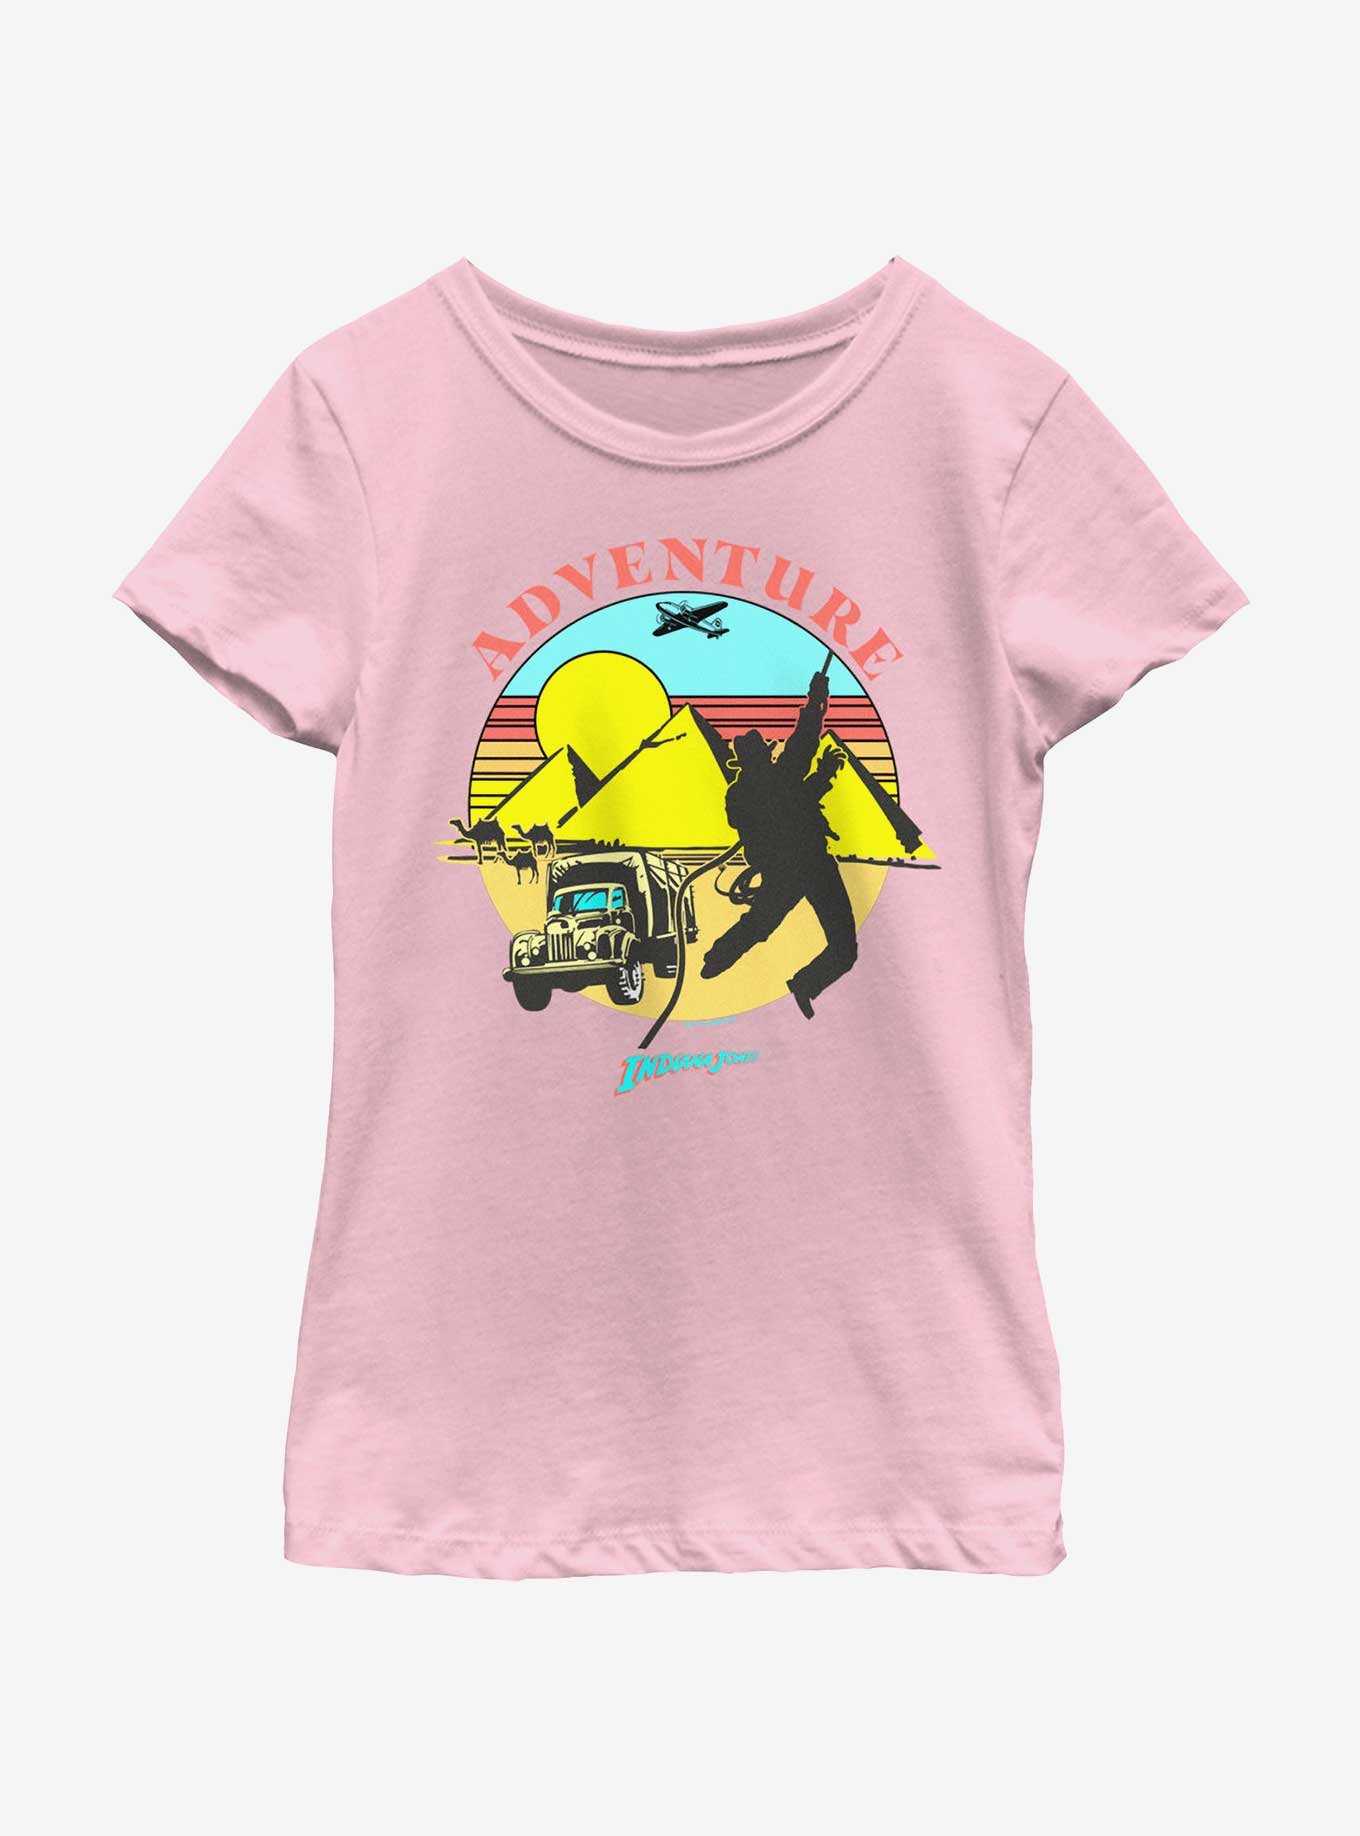 Indiana Jones The Desert Chase Adventure Youth Girls T-Shirt BoxLunch Web Exclusive, , hi-res